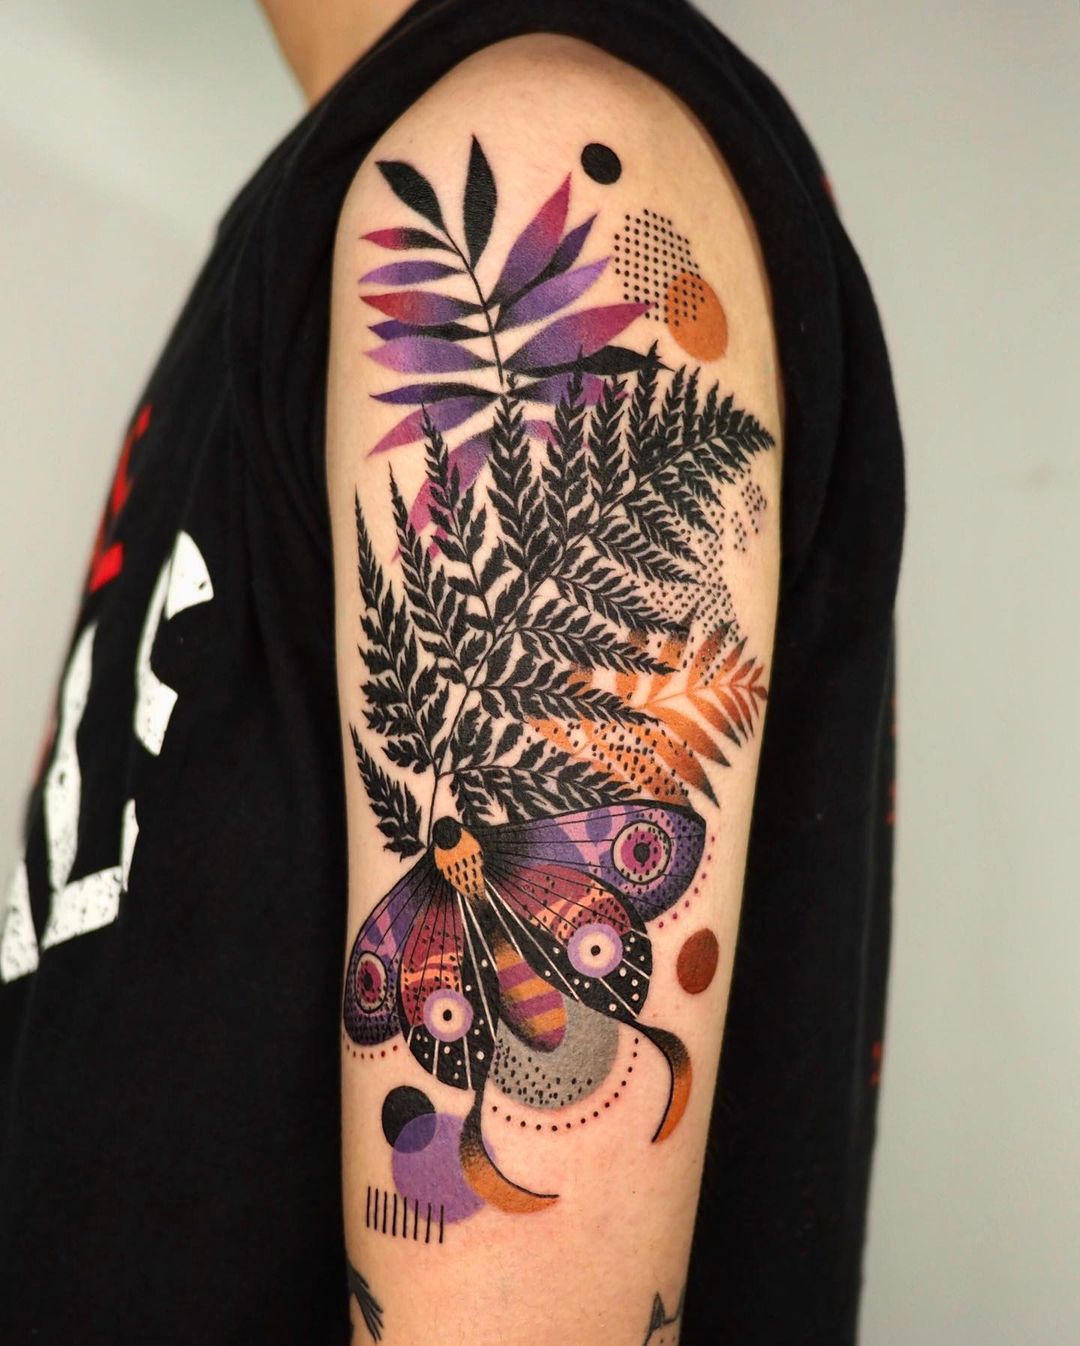 Black butterfly; Artist creates beautiful tattoos that will captivate you with the naked eye